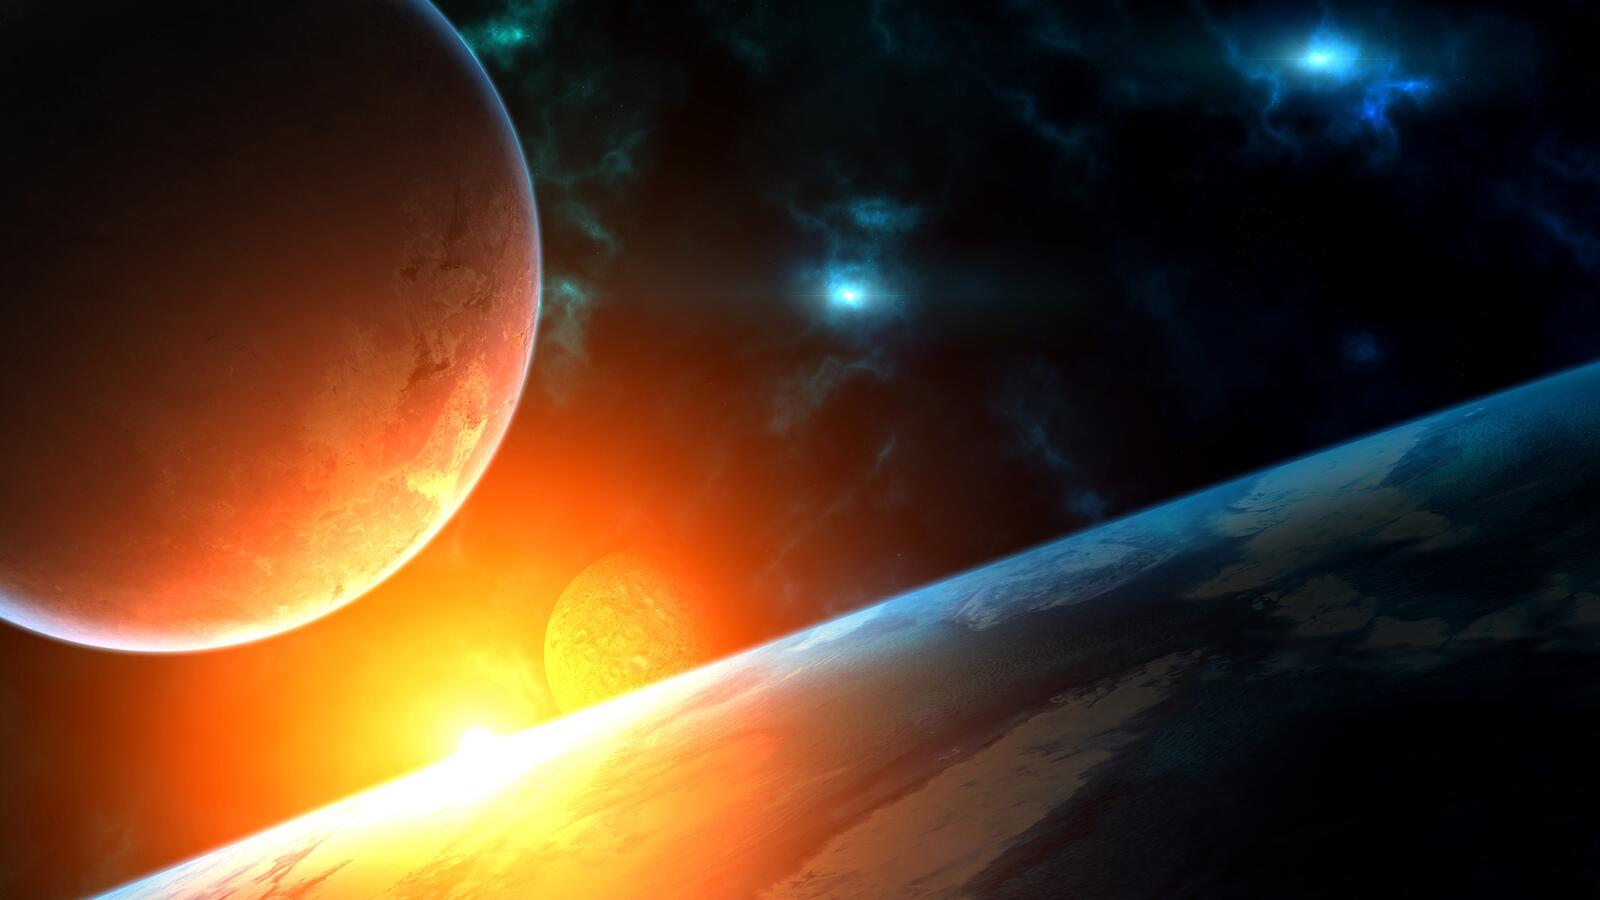 Wallpapers galaxy planets sun on the desktop